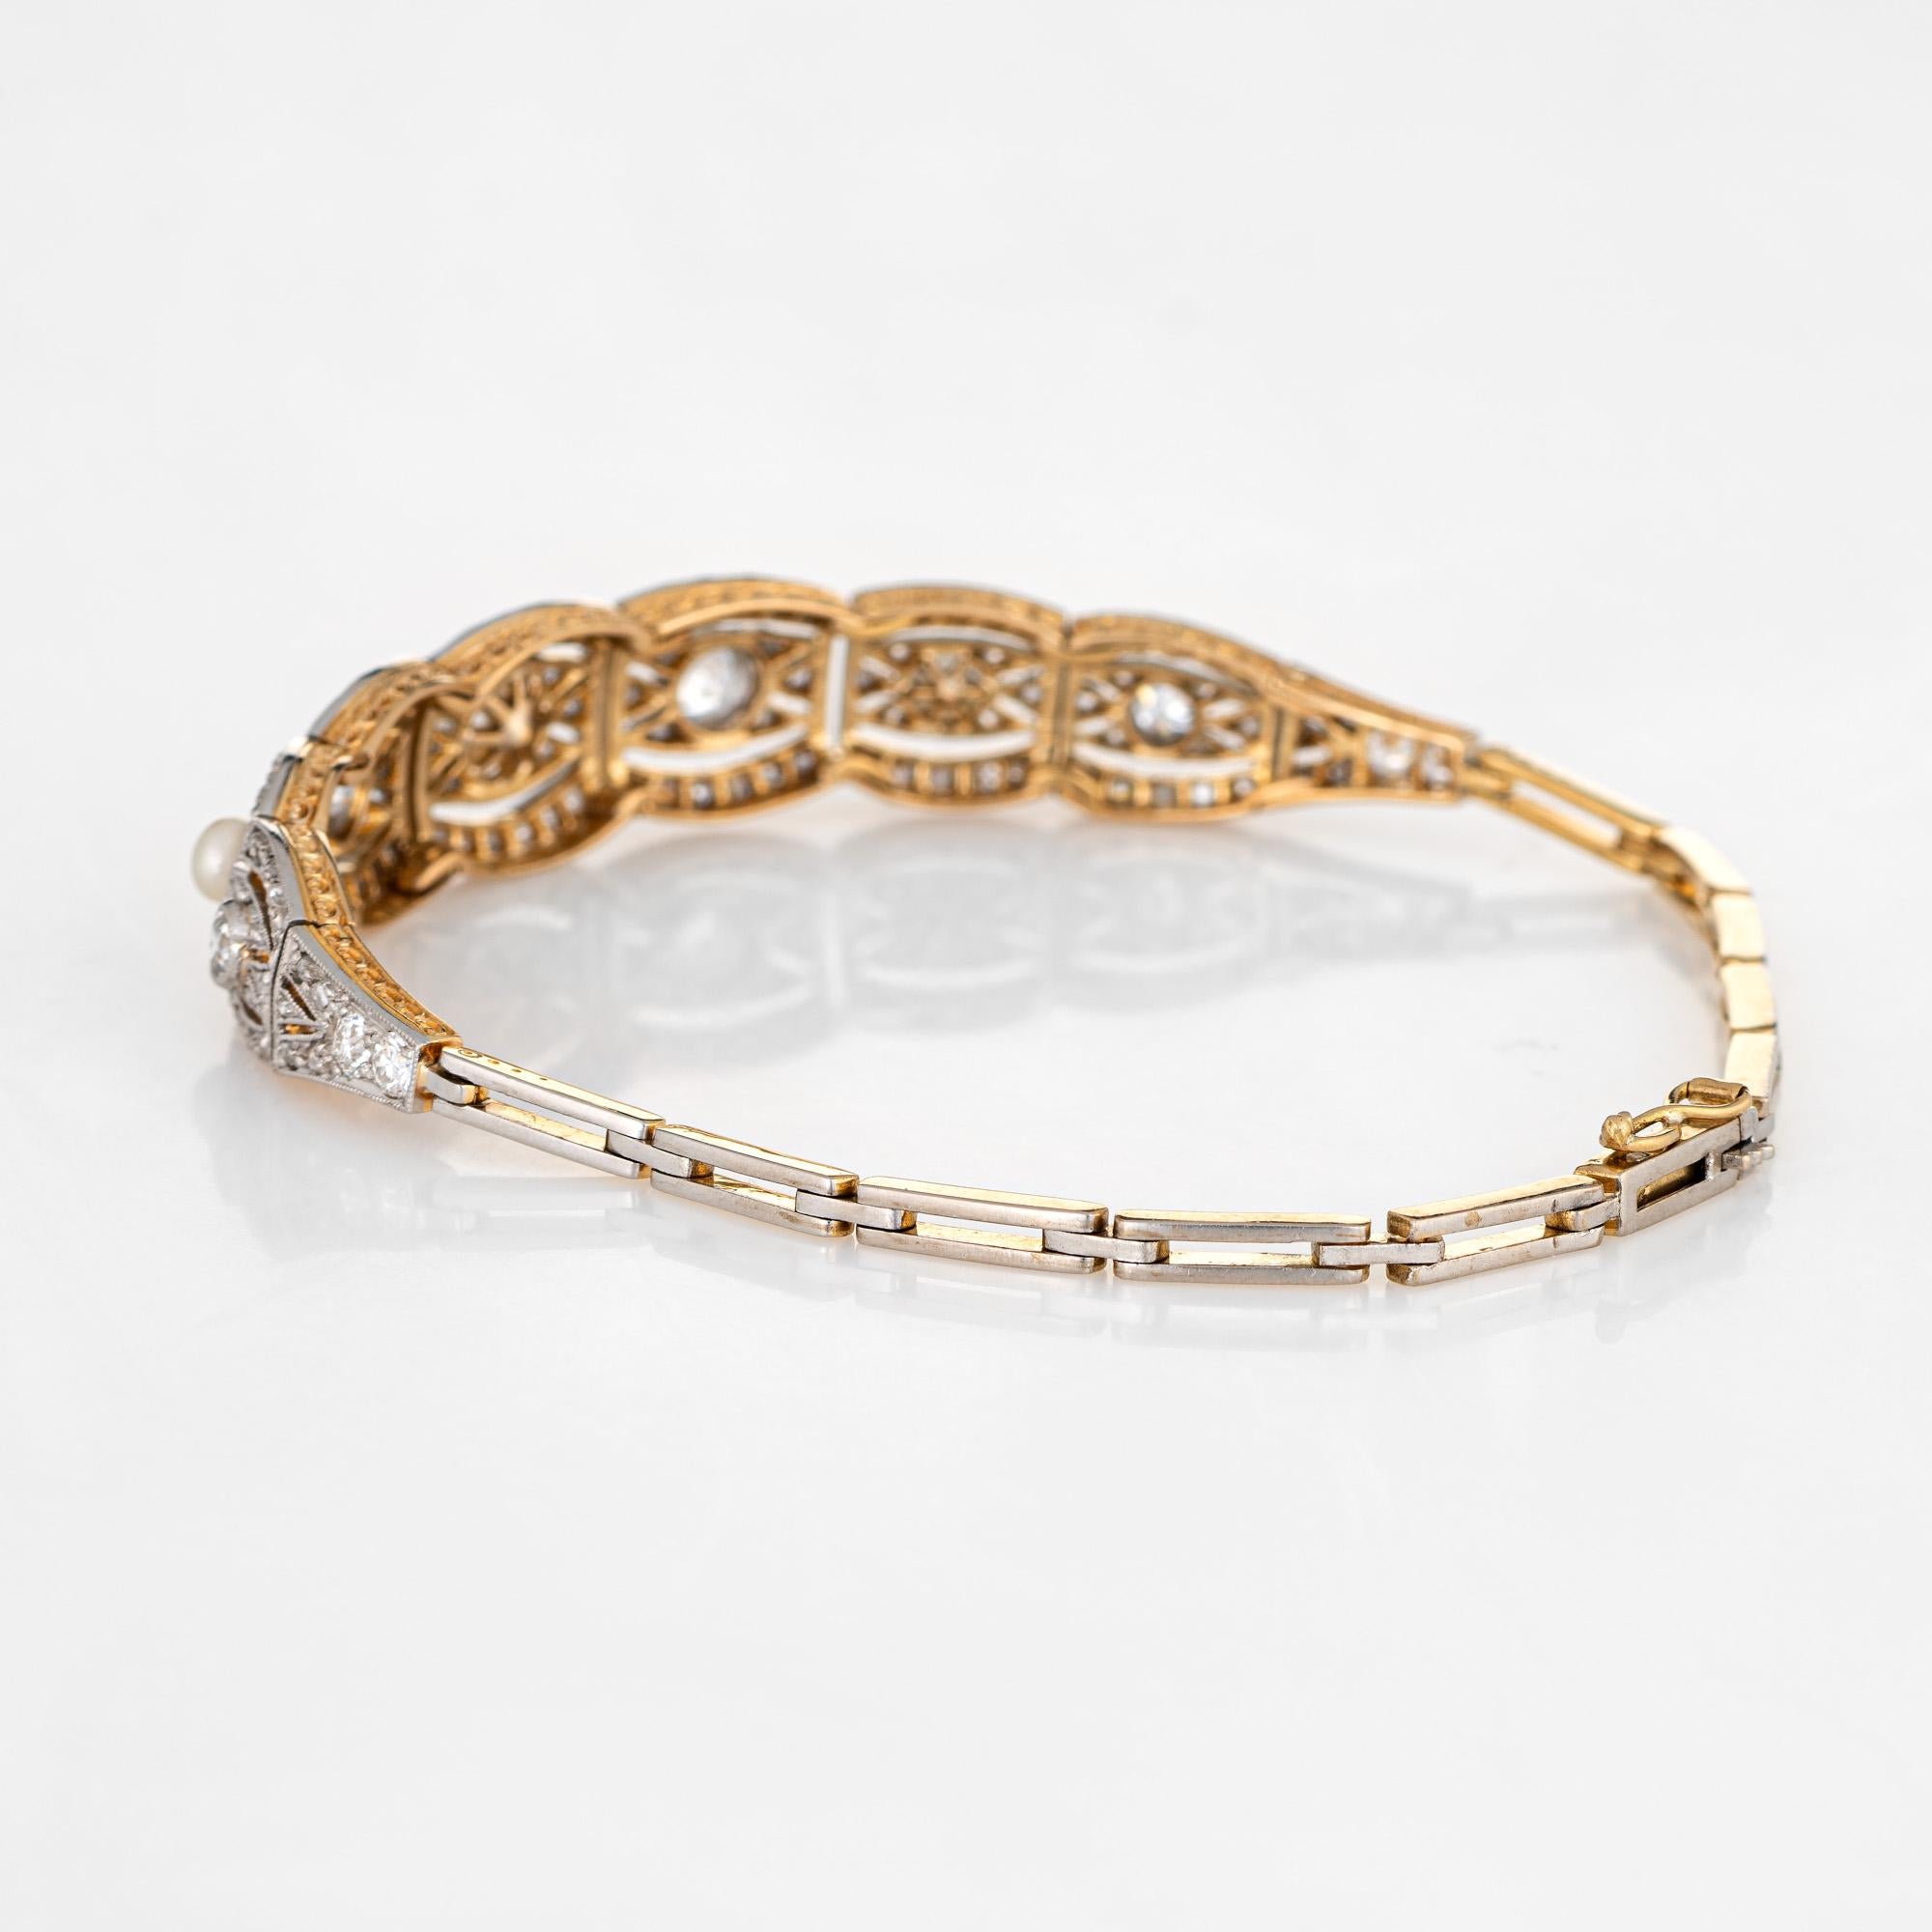 Stylish and elegant antique Edwardian era bracelet (circa 1910s) crafted in 18k yellow gold and topped with platinum. 

Old European and rose cut diamonds total an estimated 1.25 carats (estimated at I-J color and SI1-I1 clarity). Pearls measure 5mm